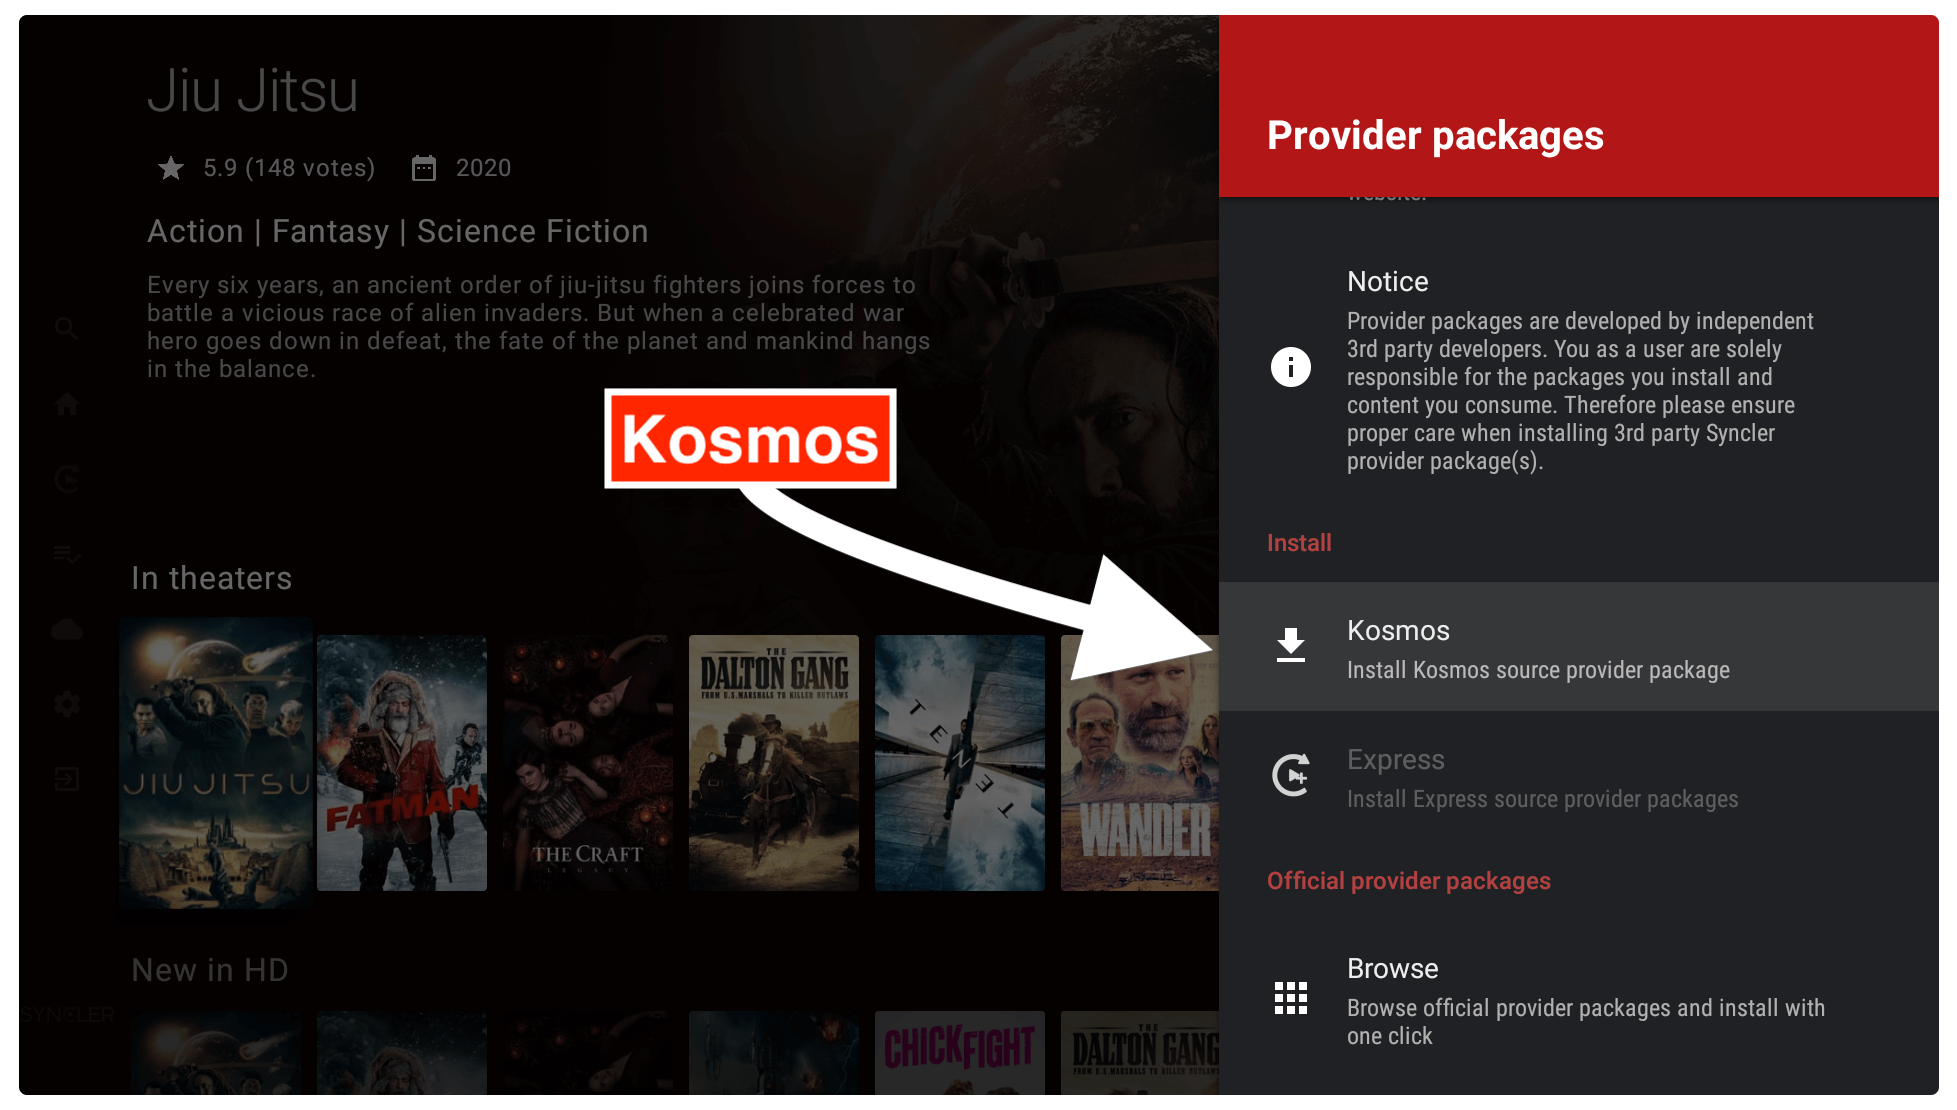 installing-kosmos-packages-syncler-on-firestick